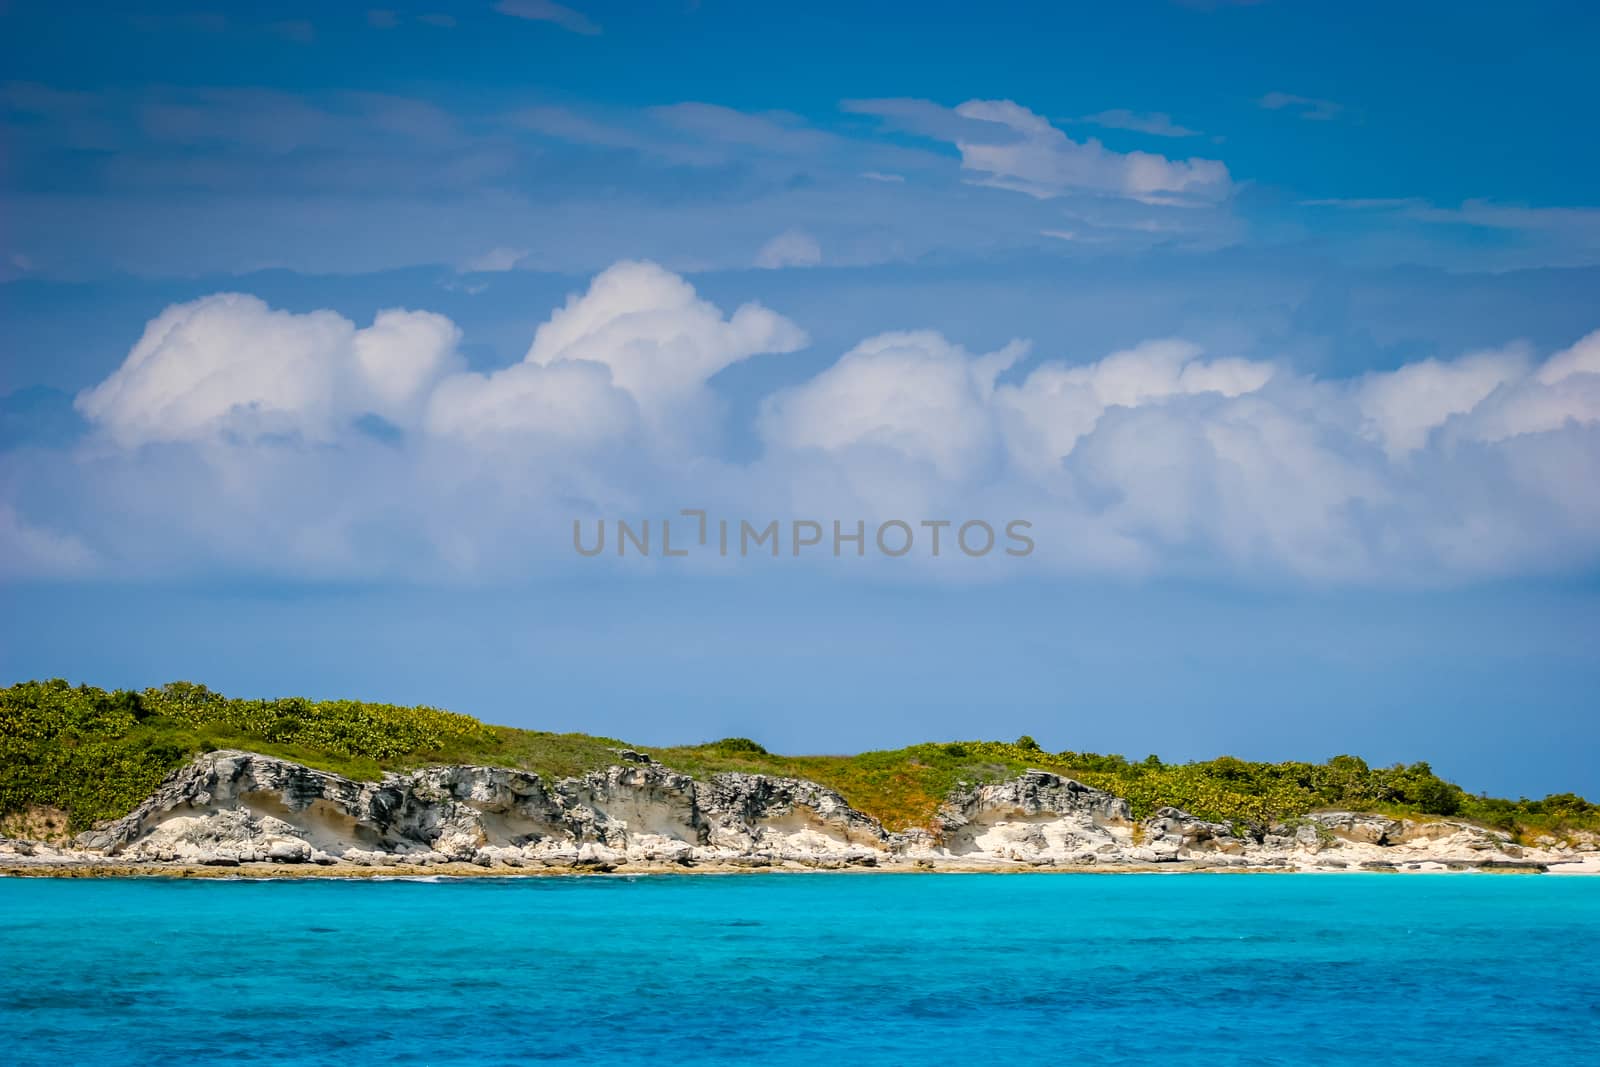 An isolated small Bahamian island separates the blue sky from the brilliant blue water.